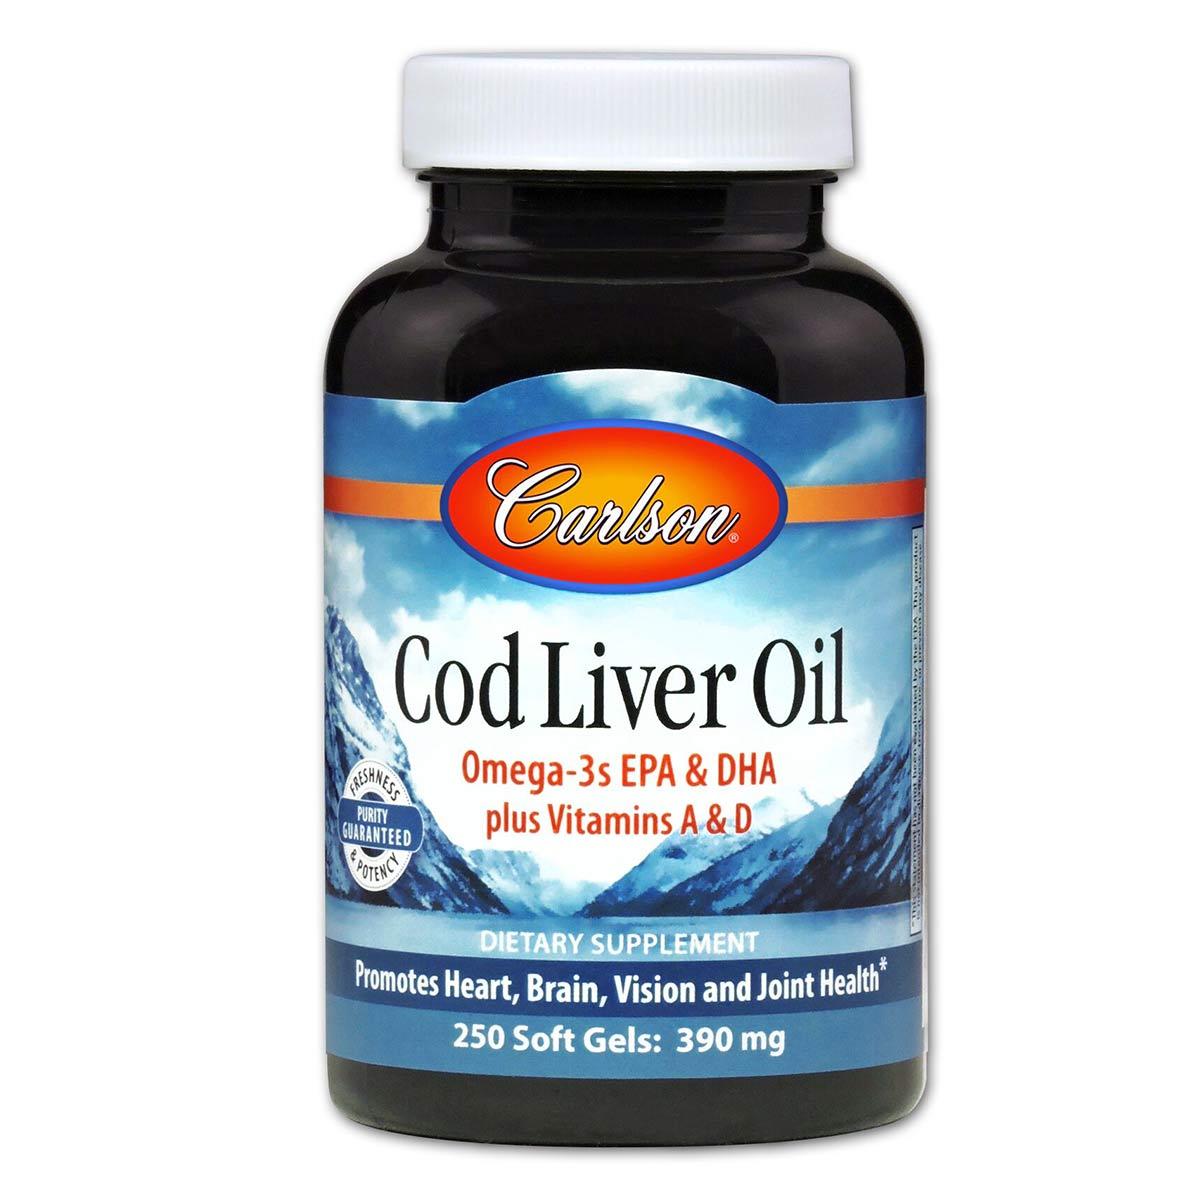 Primary image of Cod Liver Oil